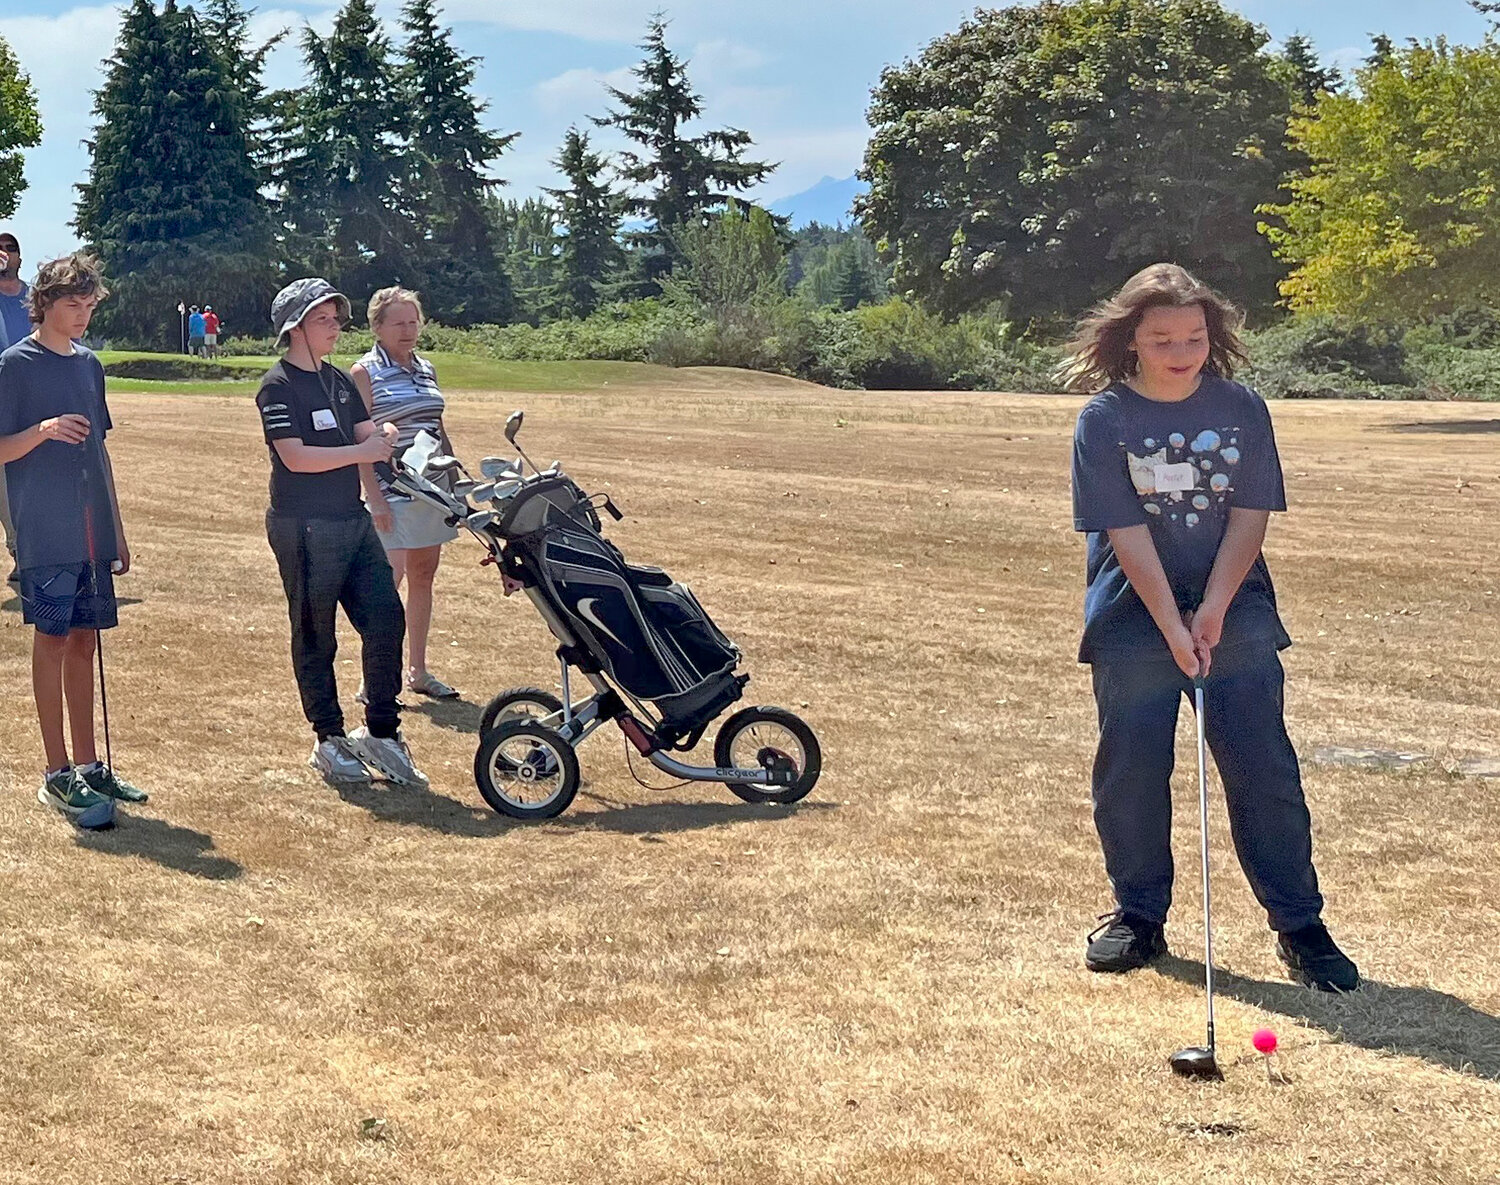 Archer McGriff prepares to drive the ball while Eliot Minartin, Shawn Williams, and Instructor Wanda Synnestvedt watch.